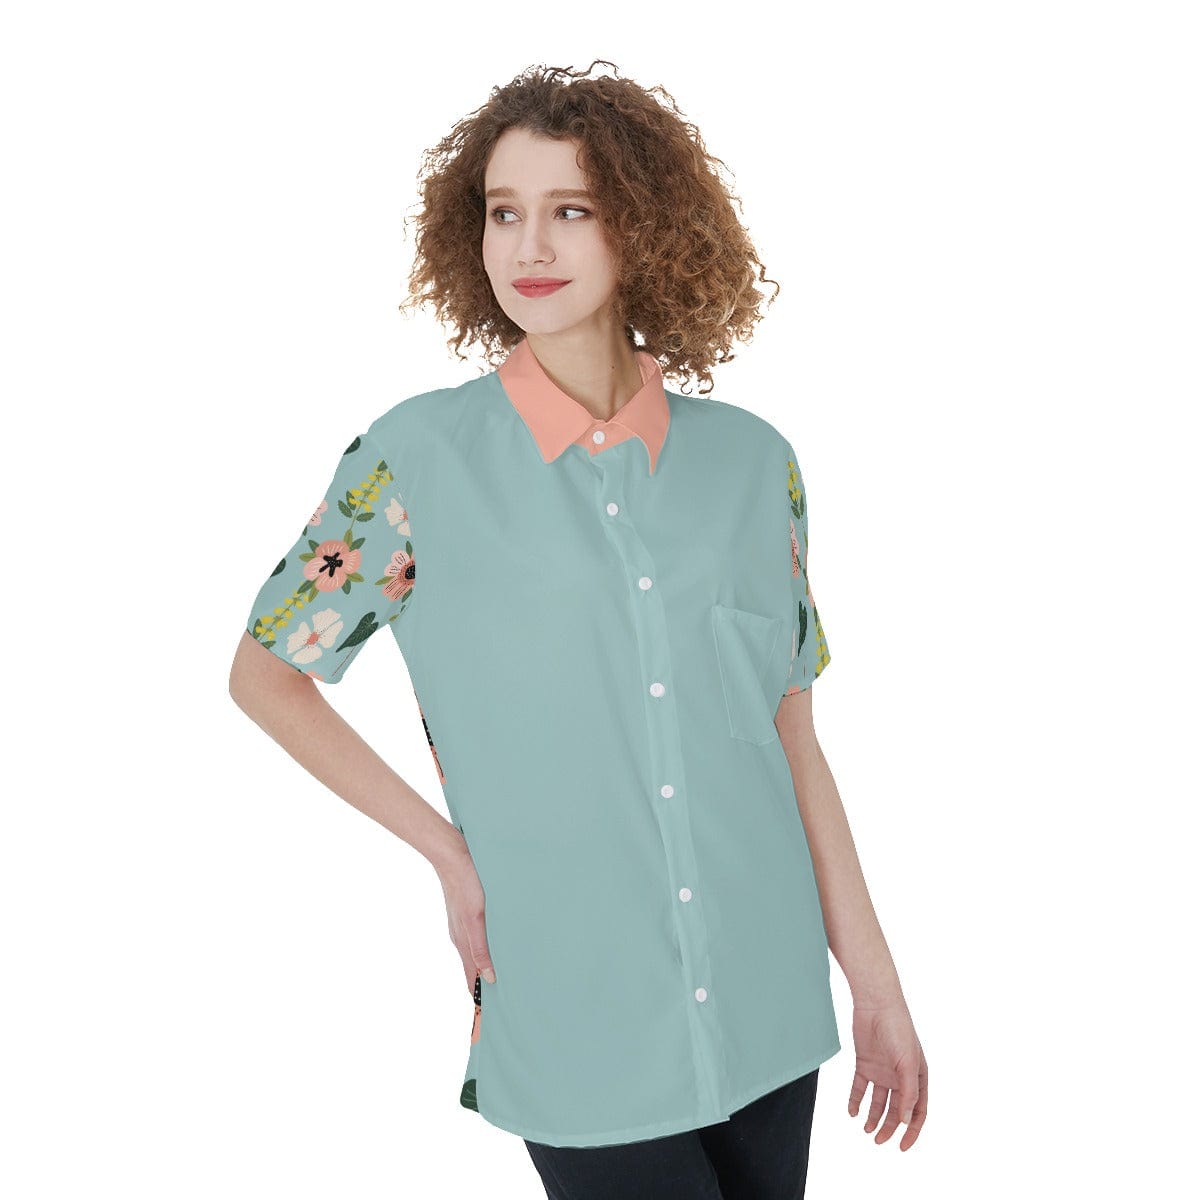 Yoycol Skirt Set Blue Green Coral Floral - Women's Short Sleeve Shirt With Pocket